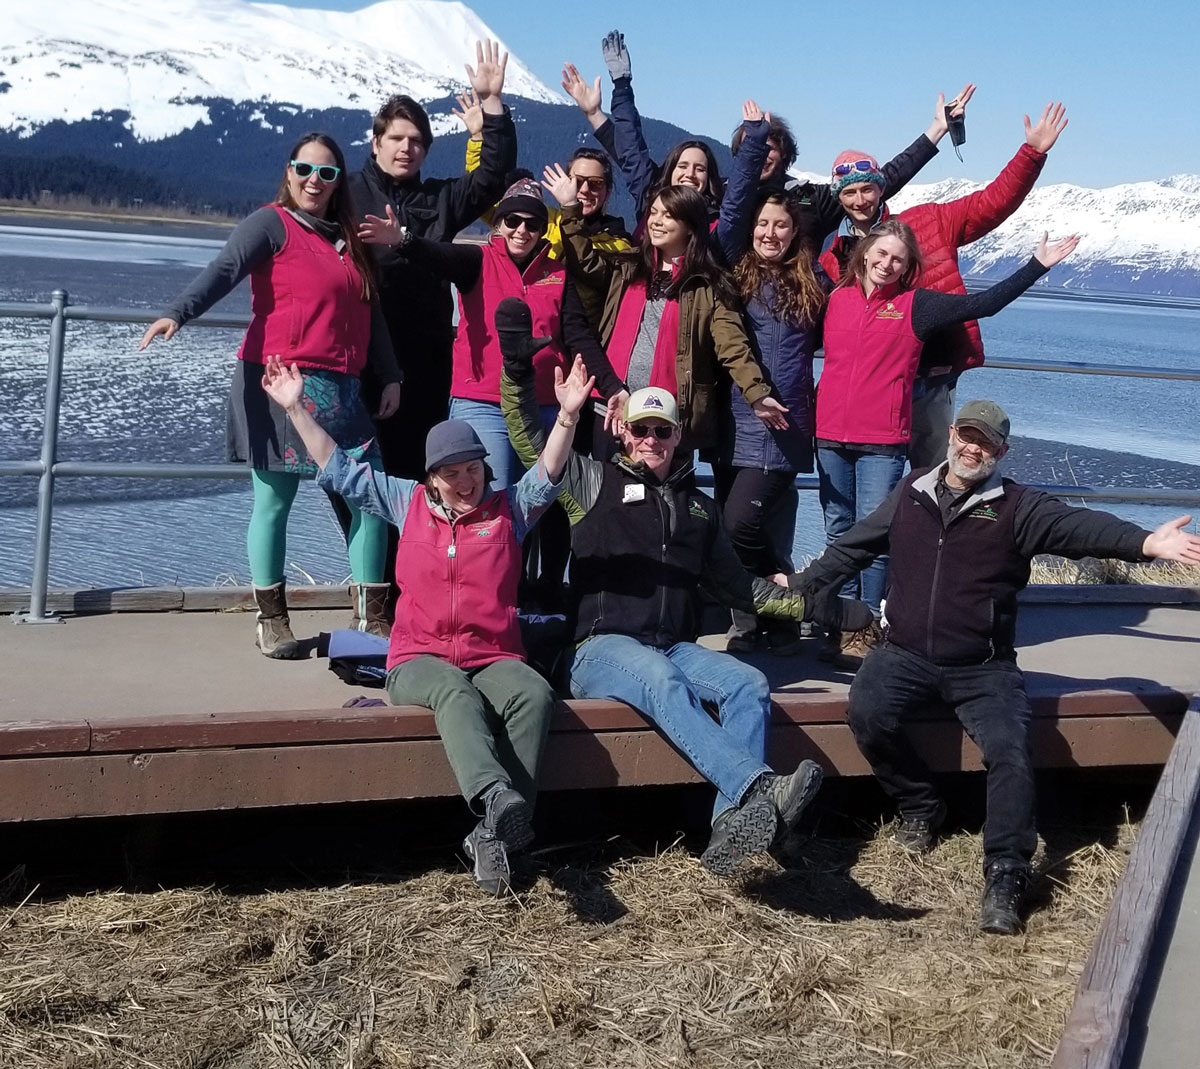 Salmon Berry Travel & Tour employees, referred to fondly as the SalmonBerries, strive to ensure every guest has the best Alaska experience they can